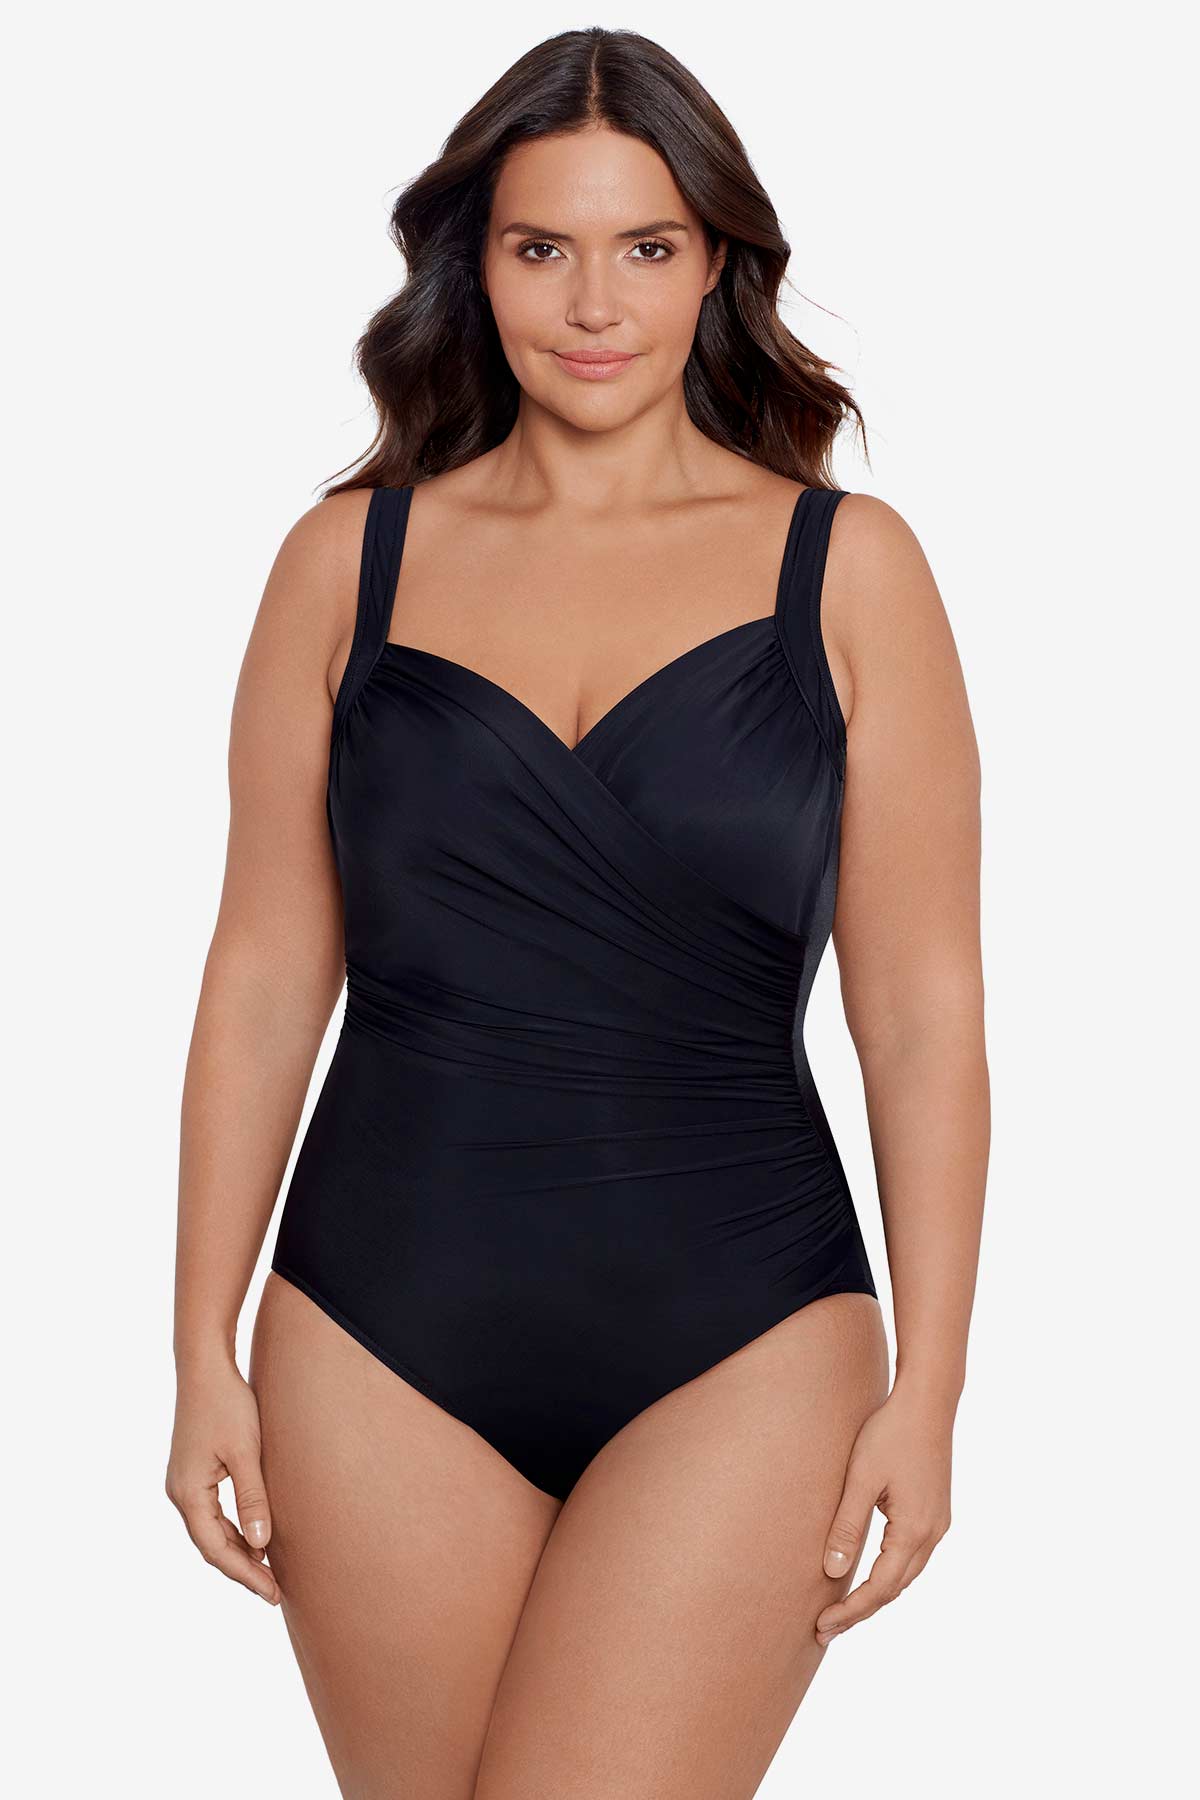 Dreamsuit by Miracle Brands Women's Plus Size Slimming Control Tankini Top